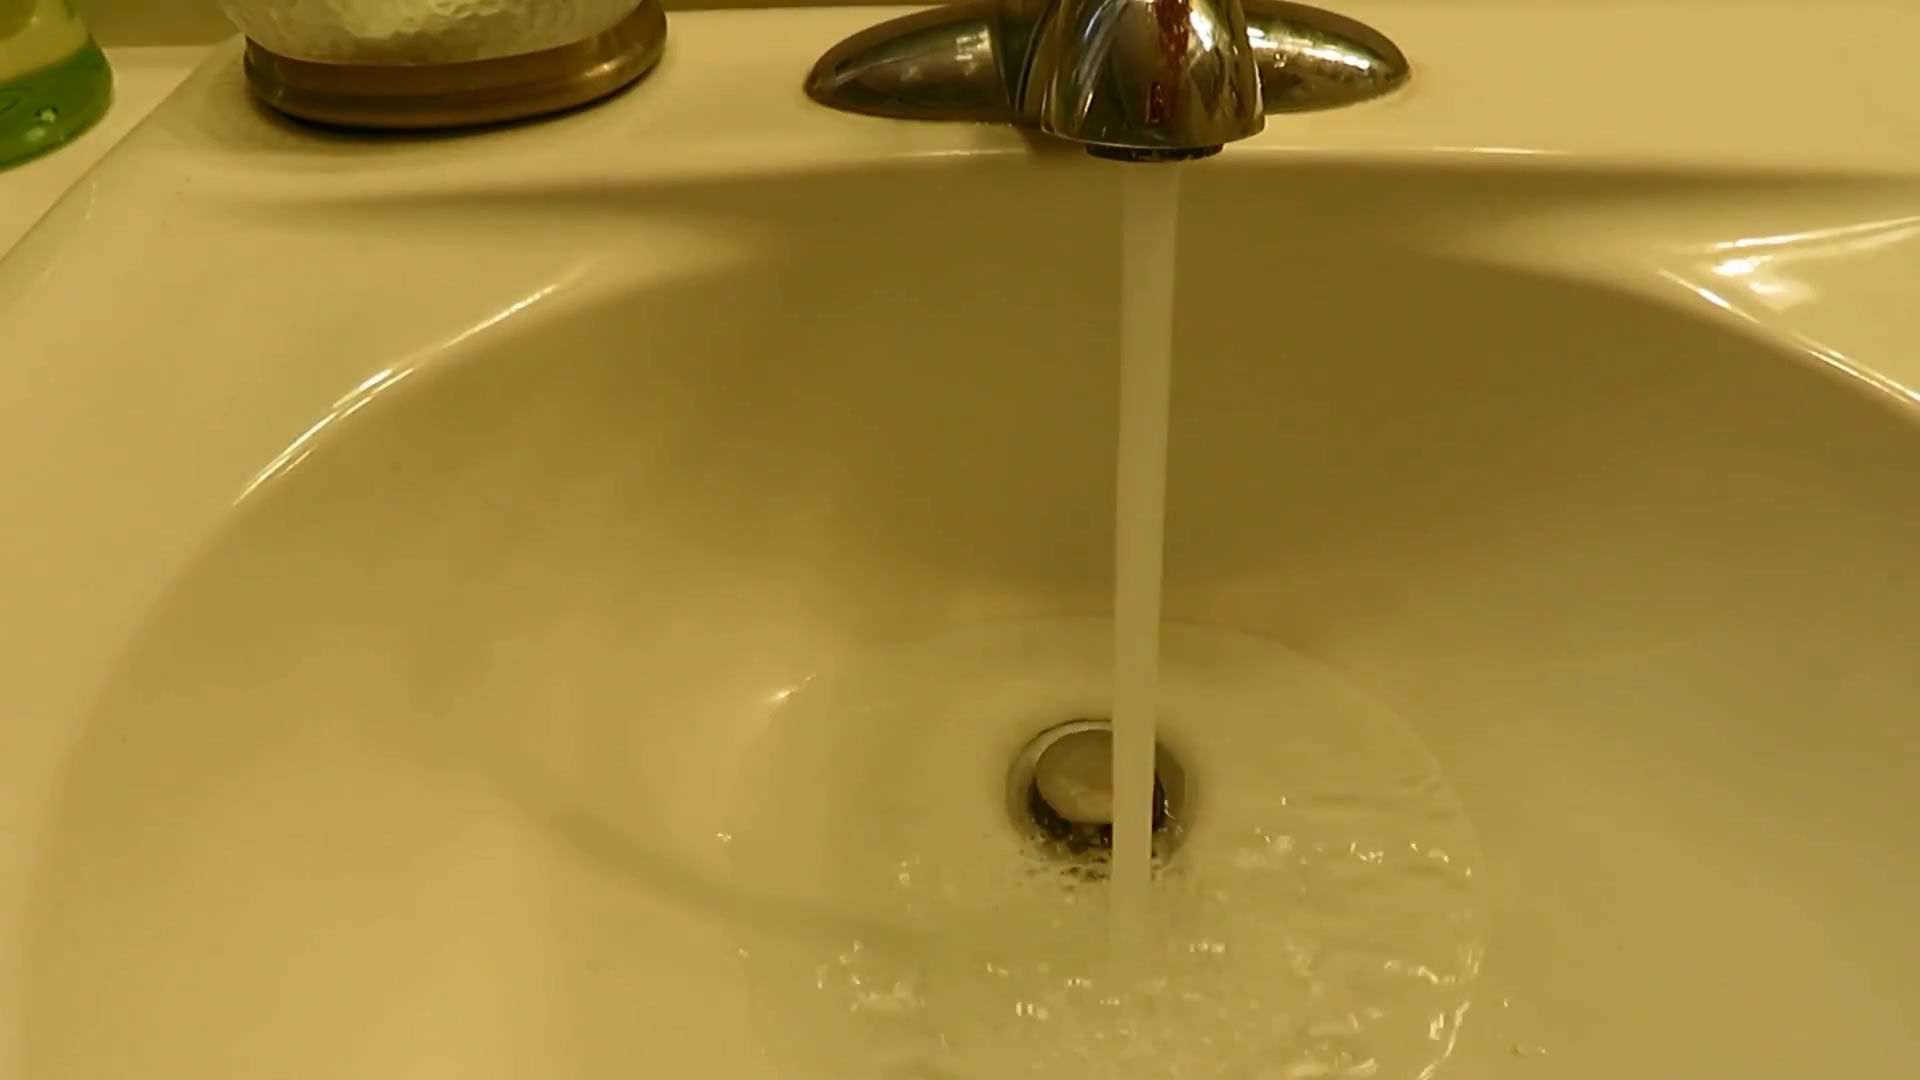 Cleaning Clogged Drains In Sinks